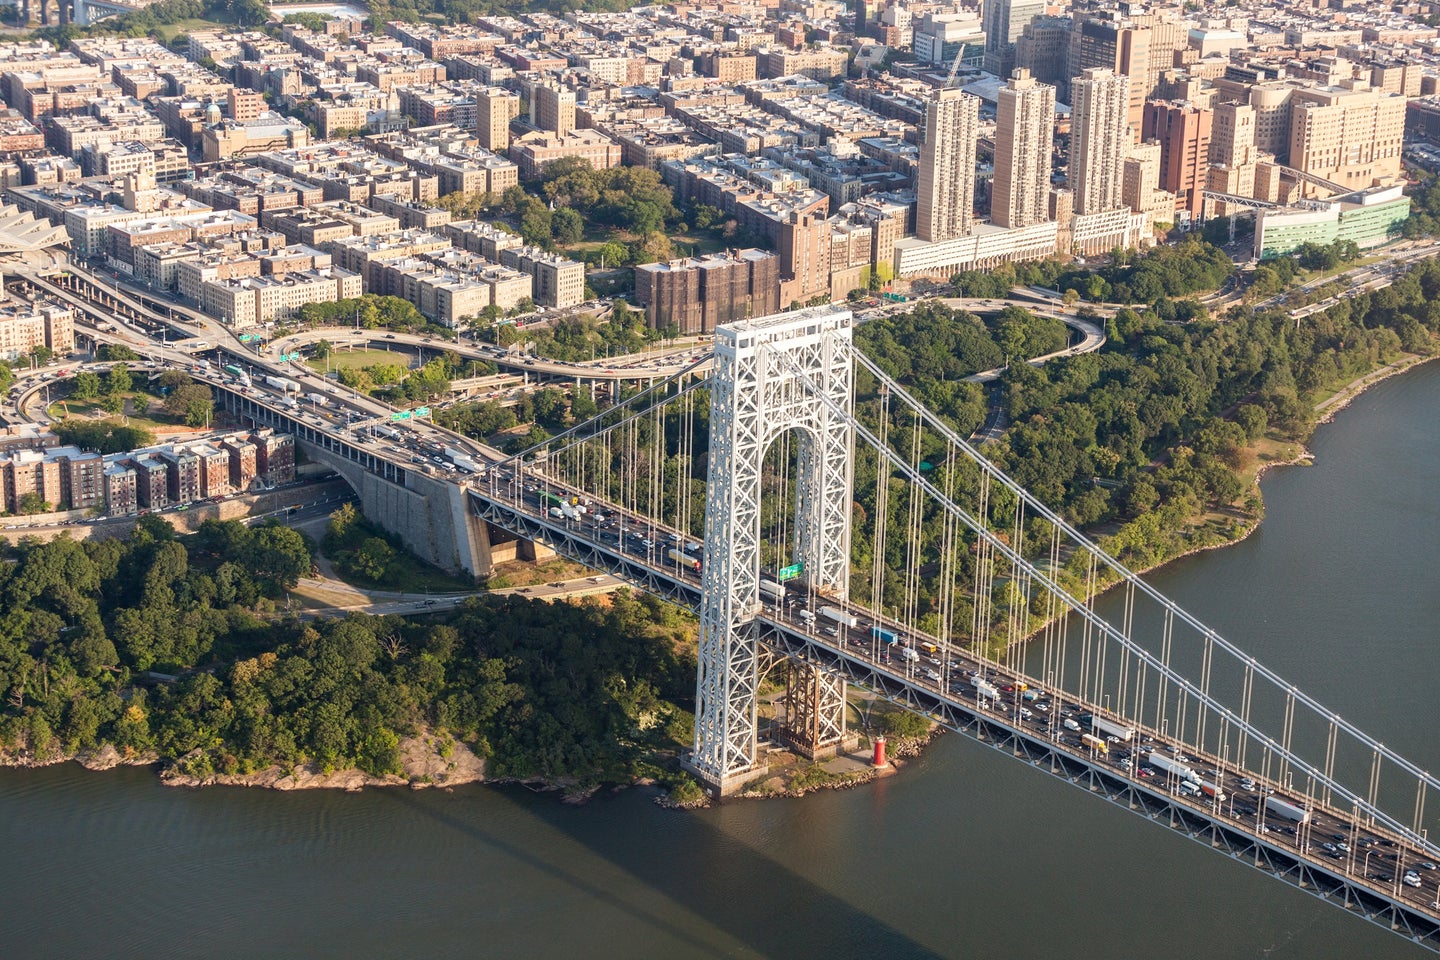 George Washington Bridge traffic going into Manhattan in the daytime when congestion pricing will apply